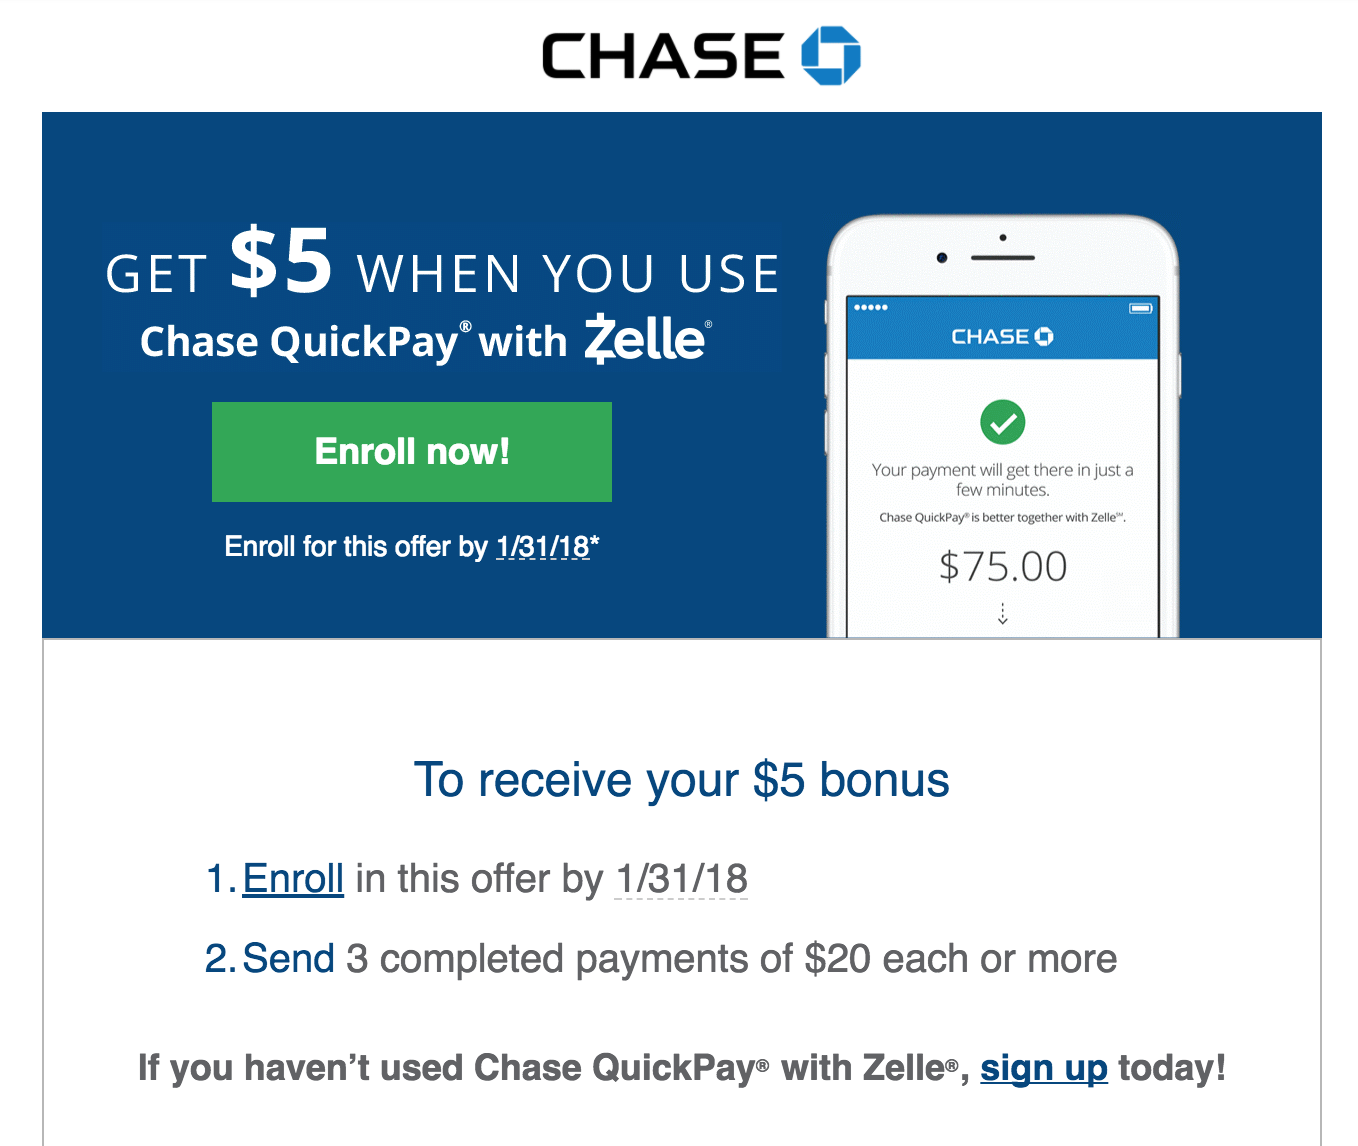 Get 5 when you use Chase QuickPay with Zelle (Possible YMMV)